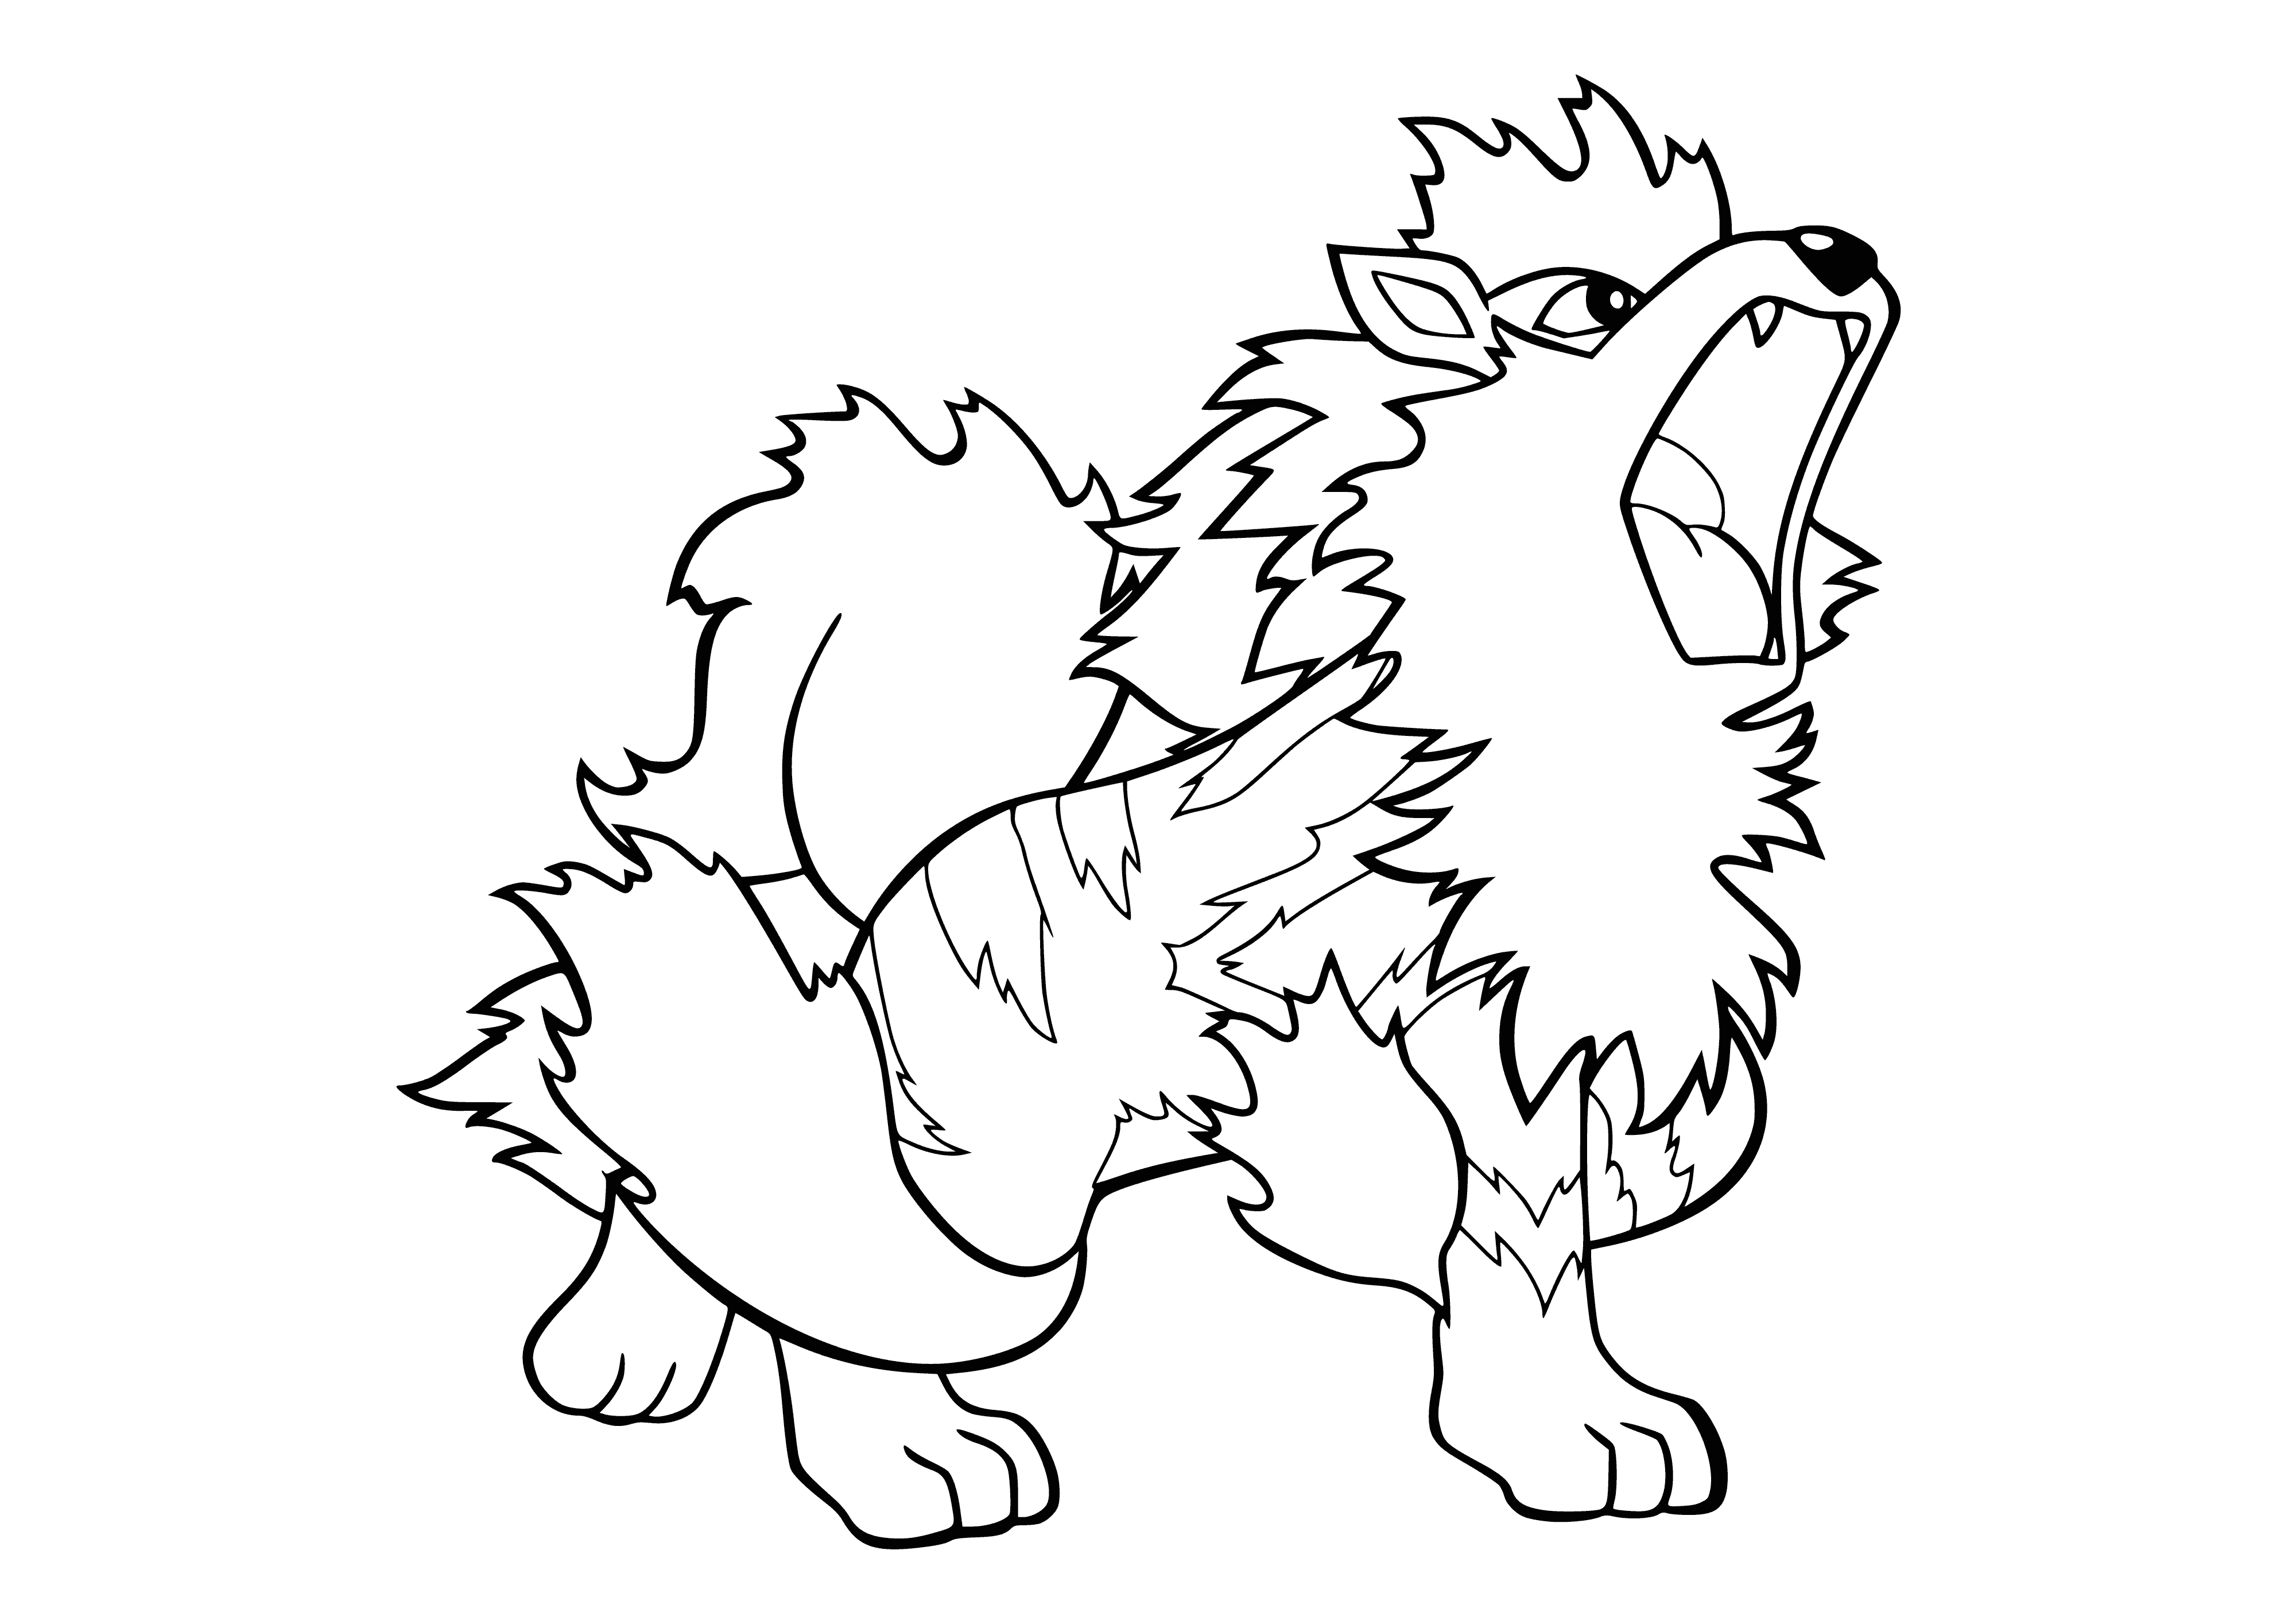 Pokemon Arcanine coloring page